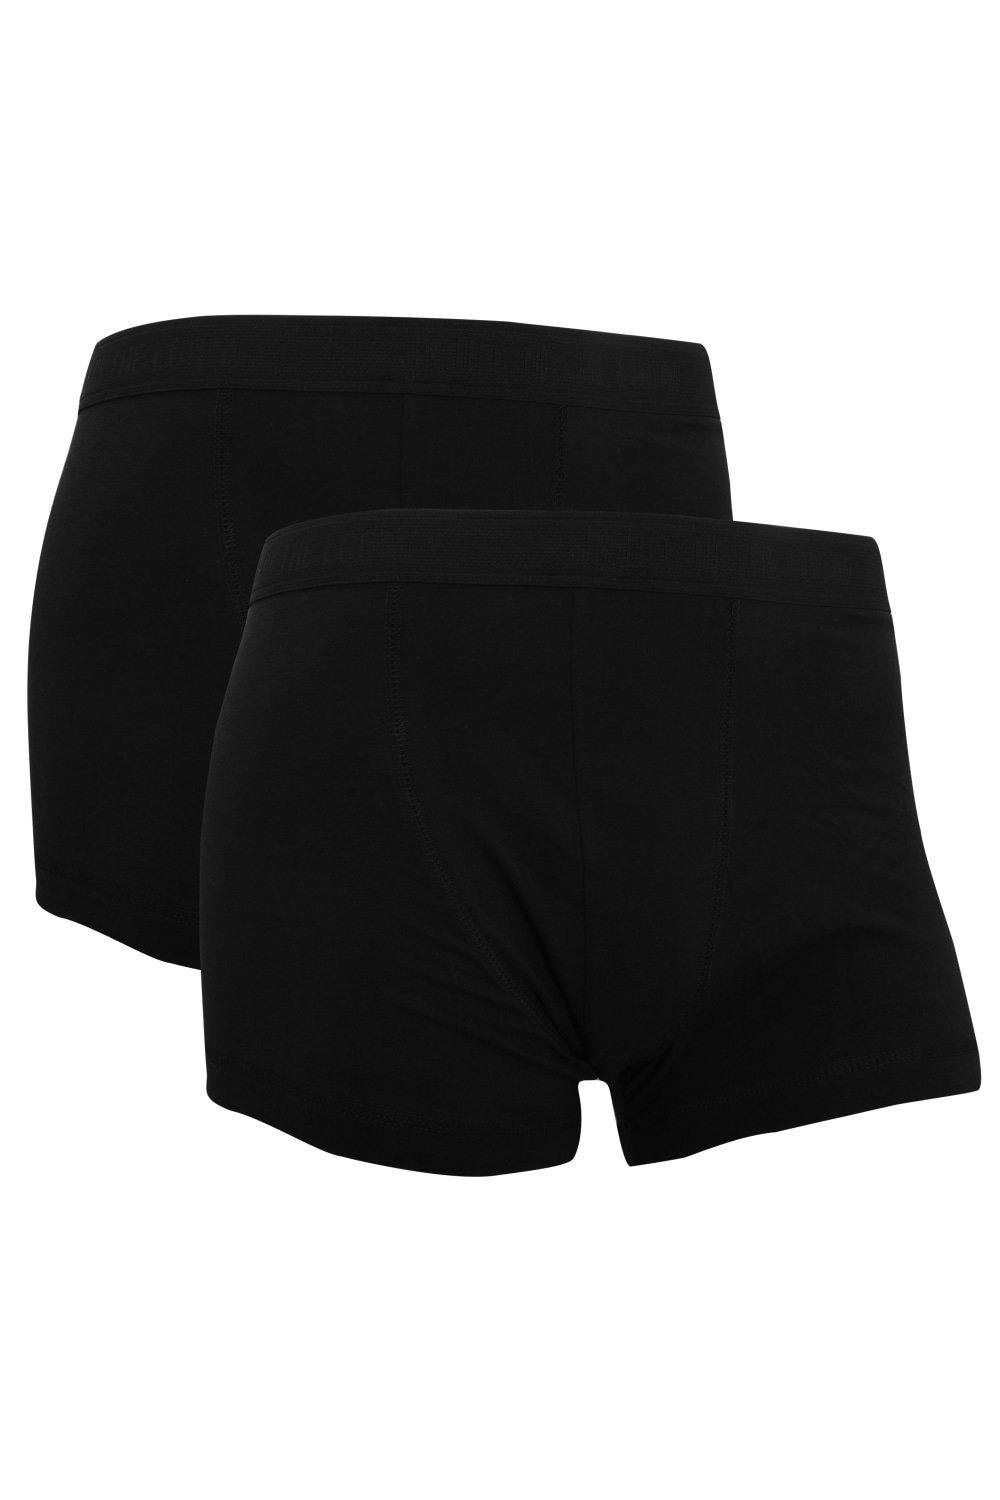 Classic Shorty Cotton Rich Boxer Shorts (Pack Of 2)